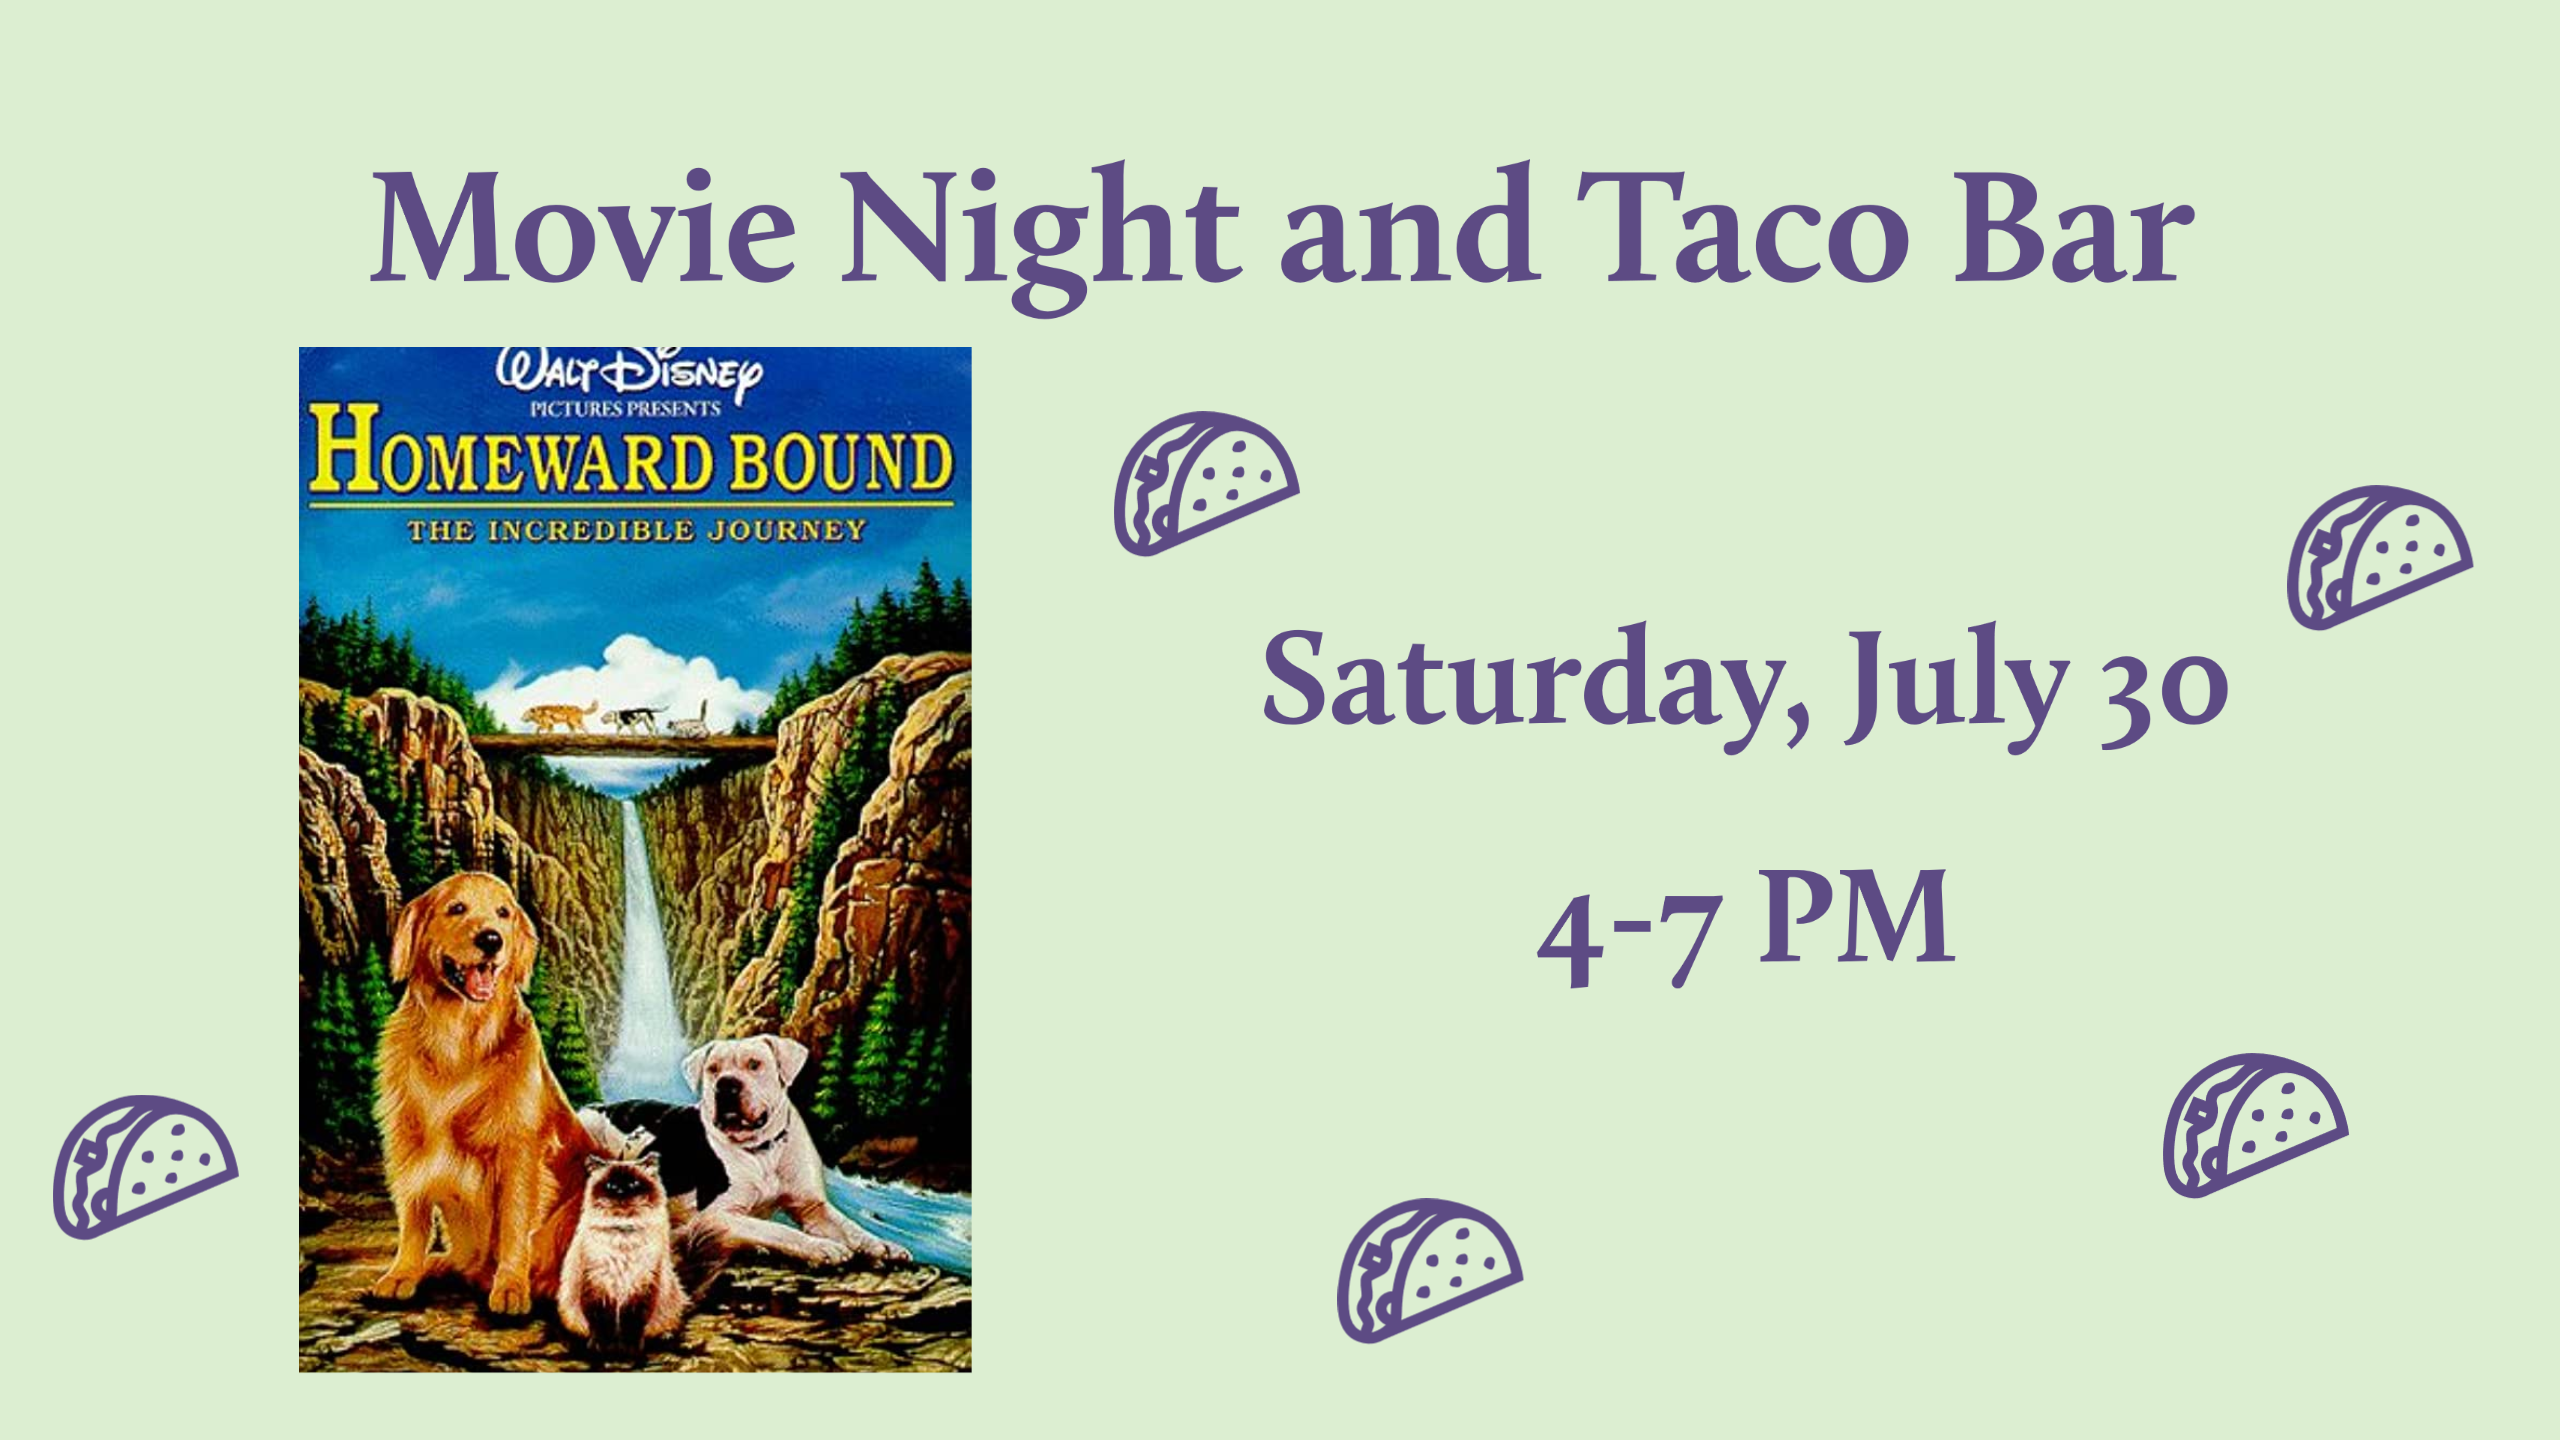 movie poster for Homeward Bound with purple taco icons and purple text on a green background reading "Movie Night and Taco Bar Saturday, July 15 4-7 PM"